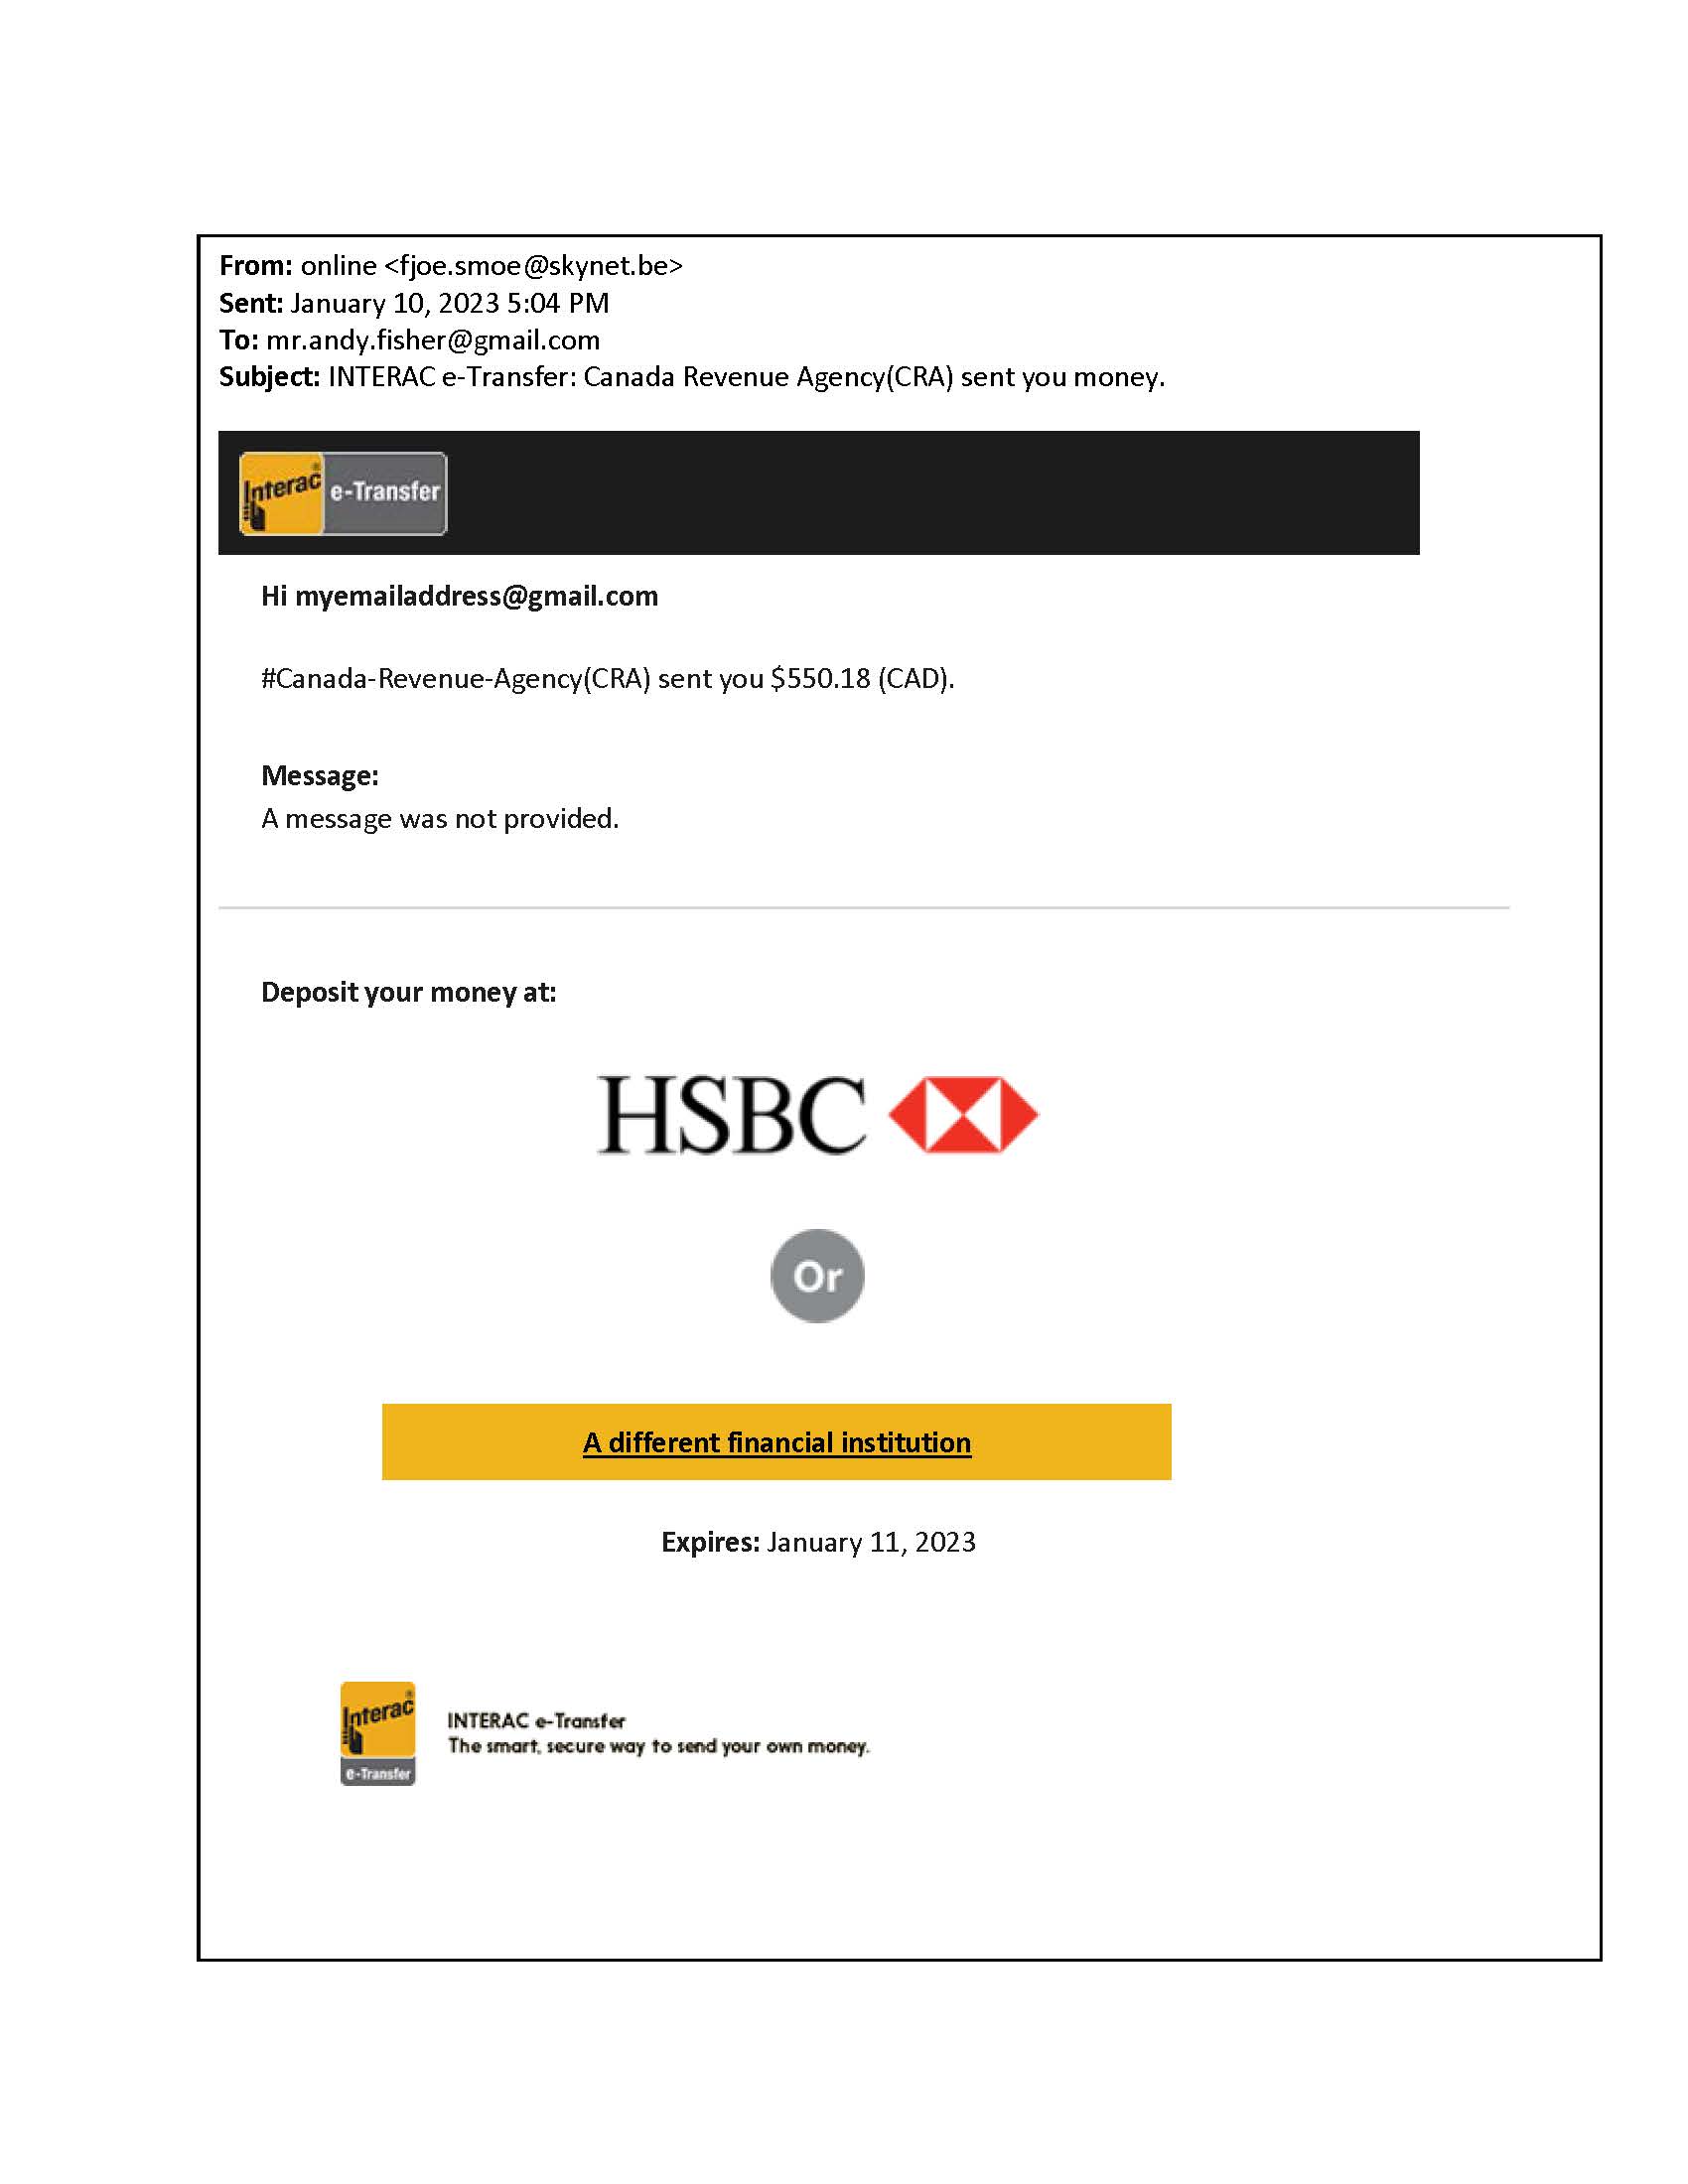 additional-forms-and-documents/Fraud_Email_ENG.jpg